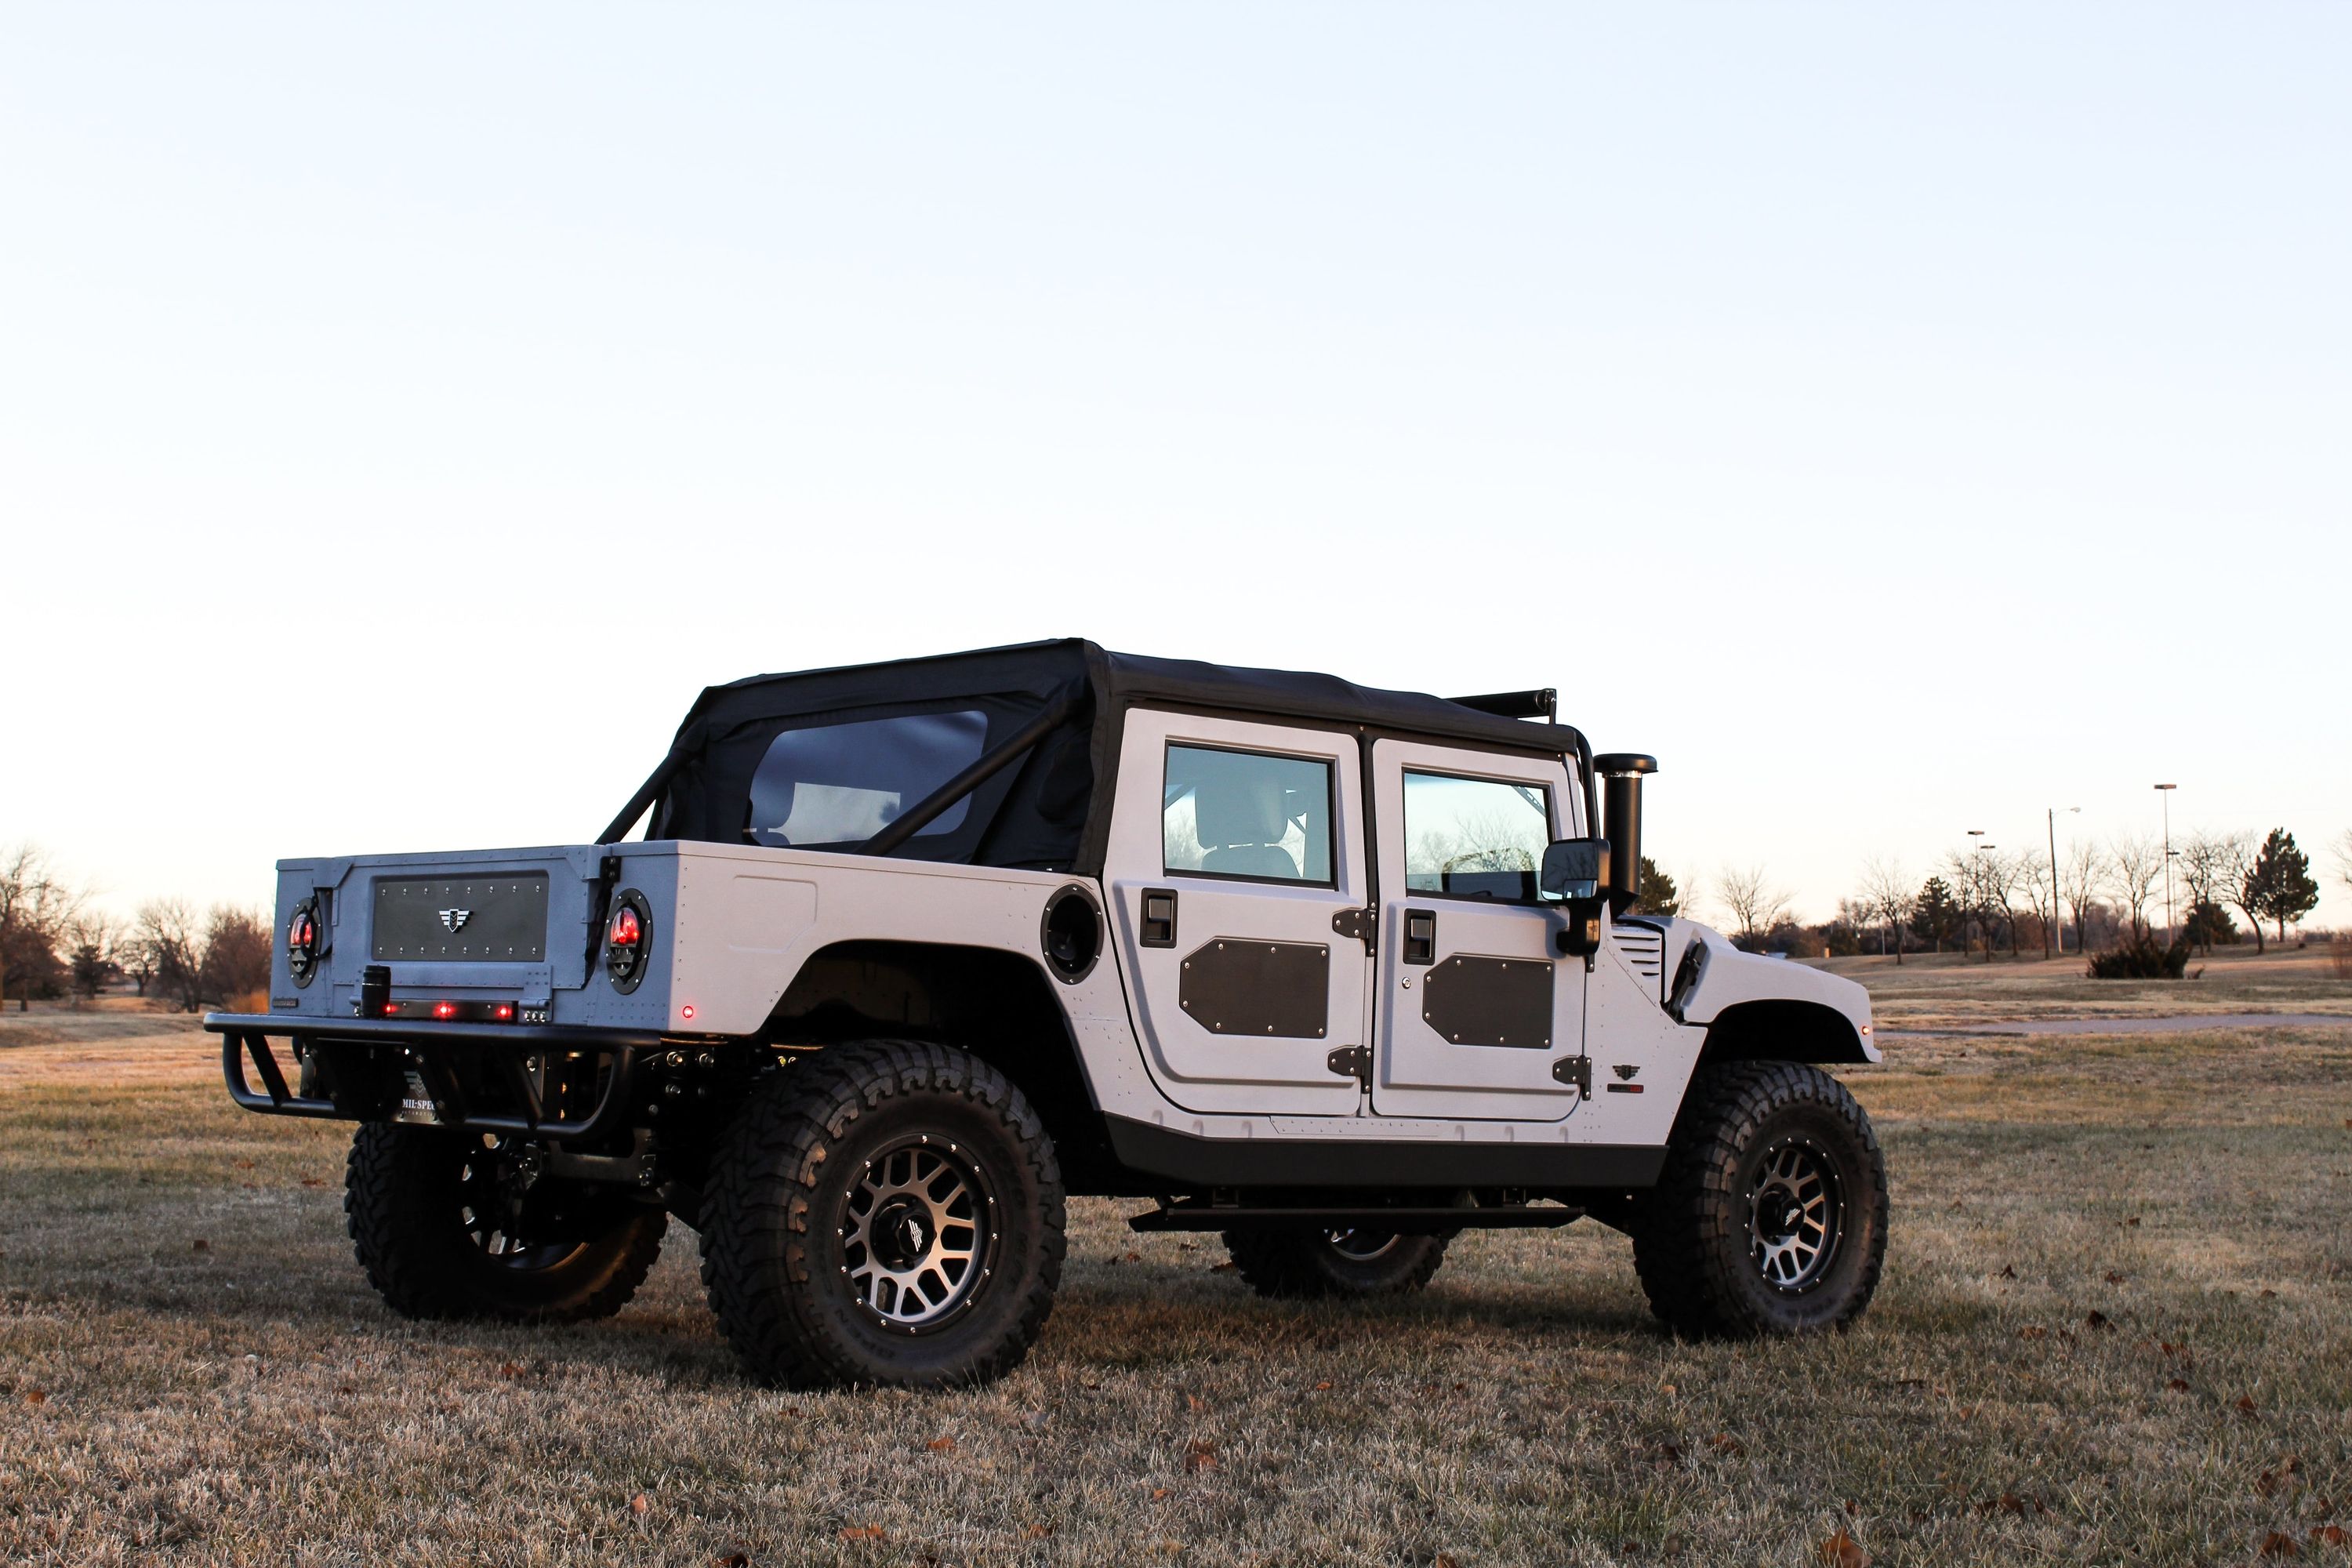 This is Mil-Spec Automotive's $412,000 Hummer H1